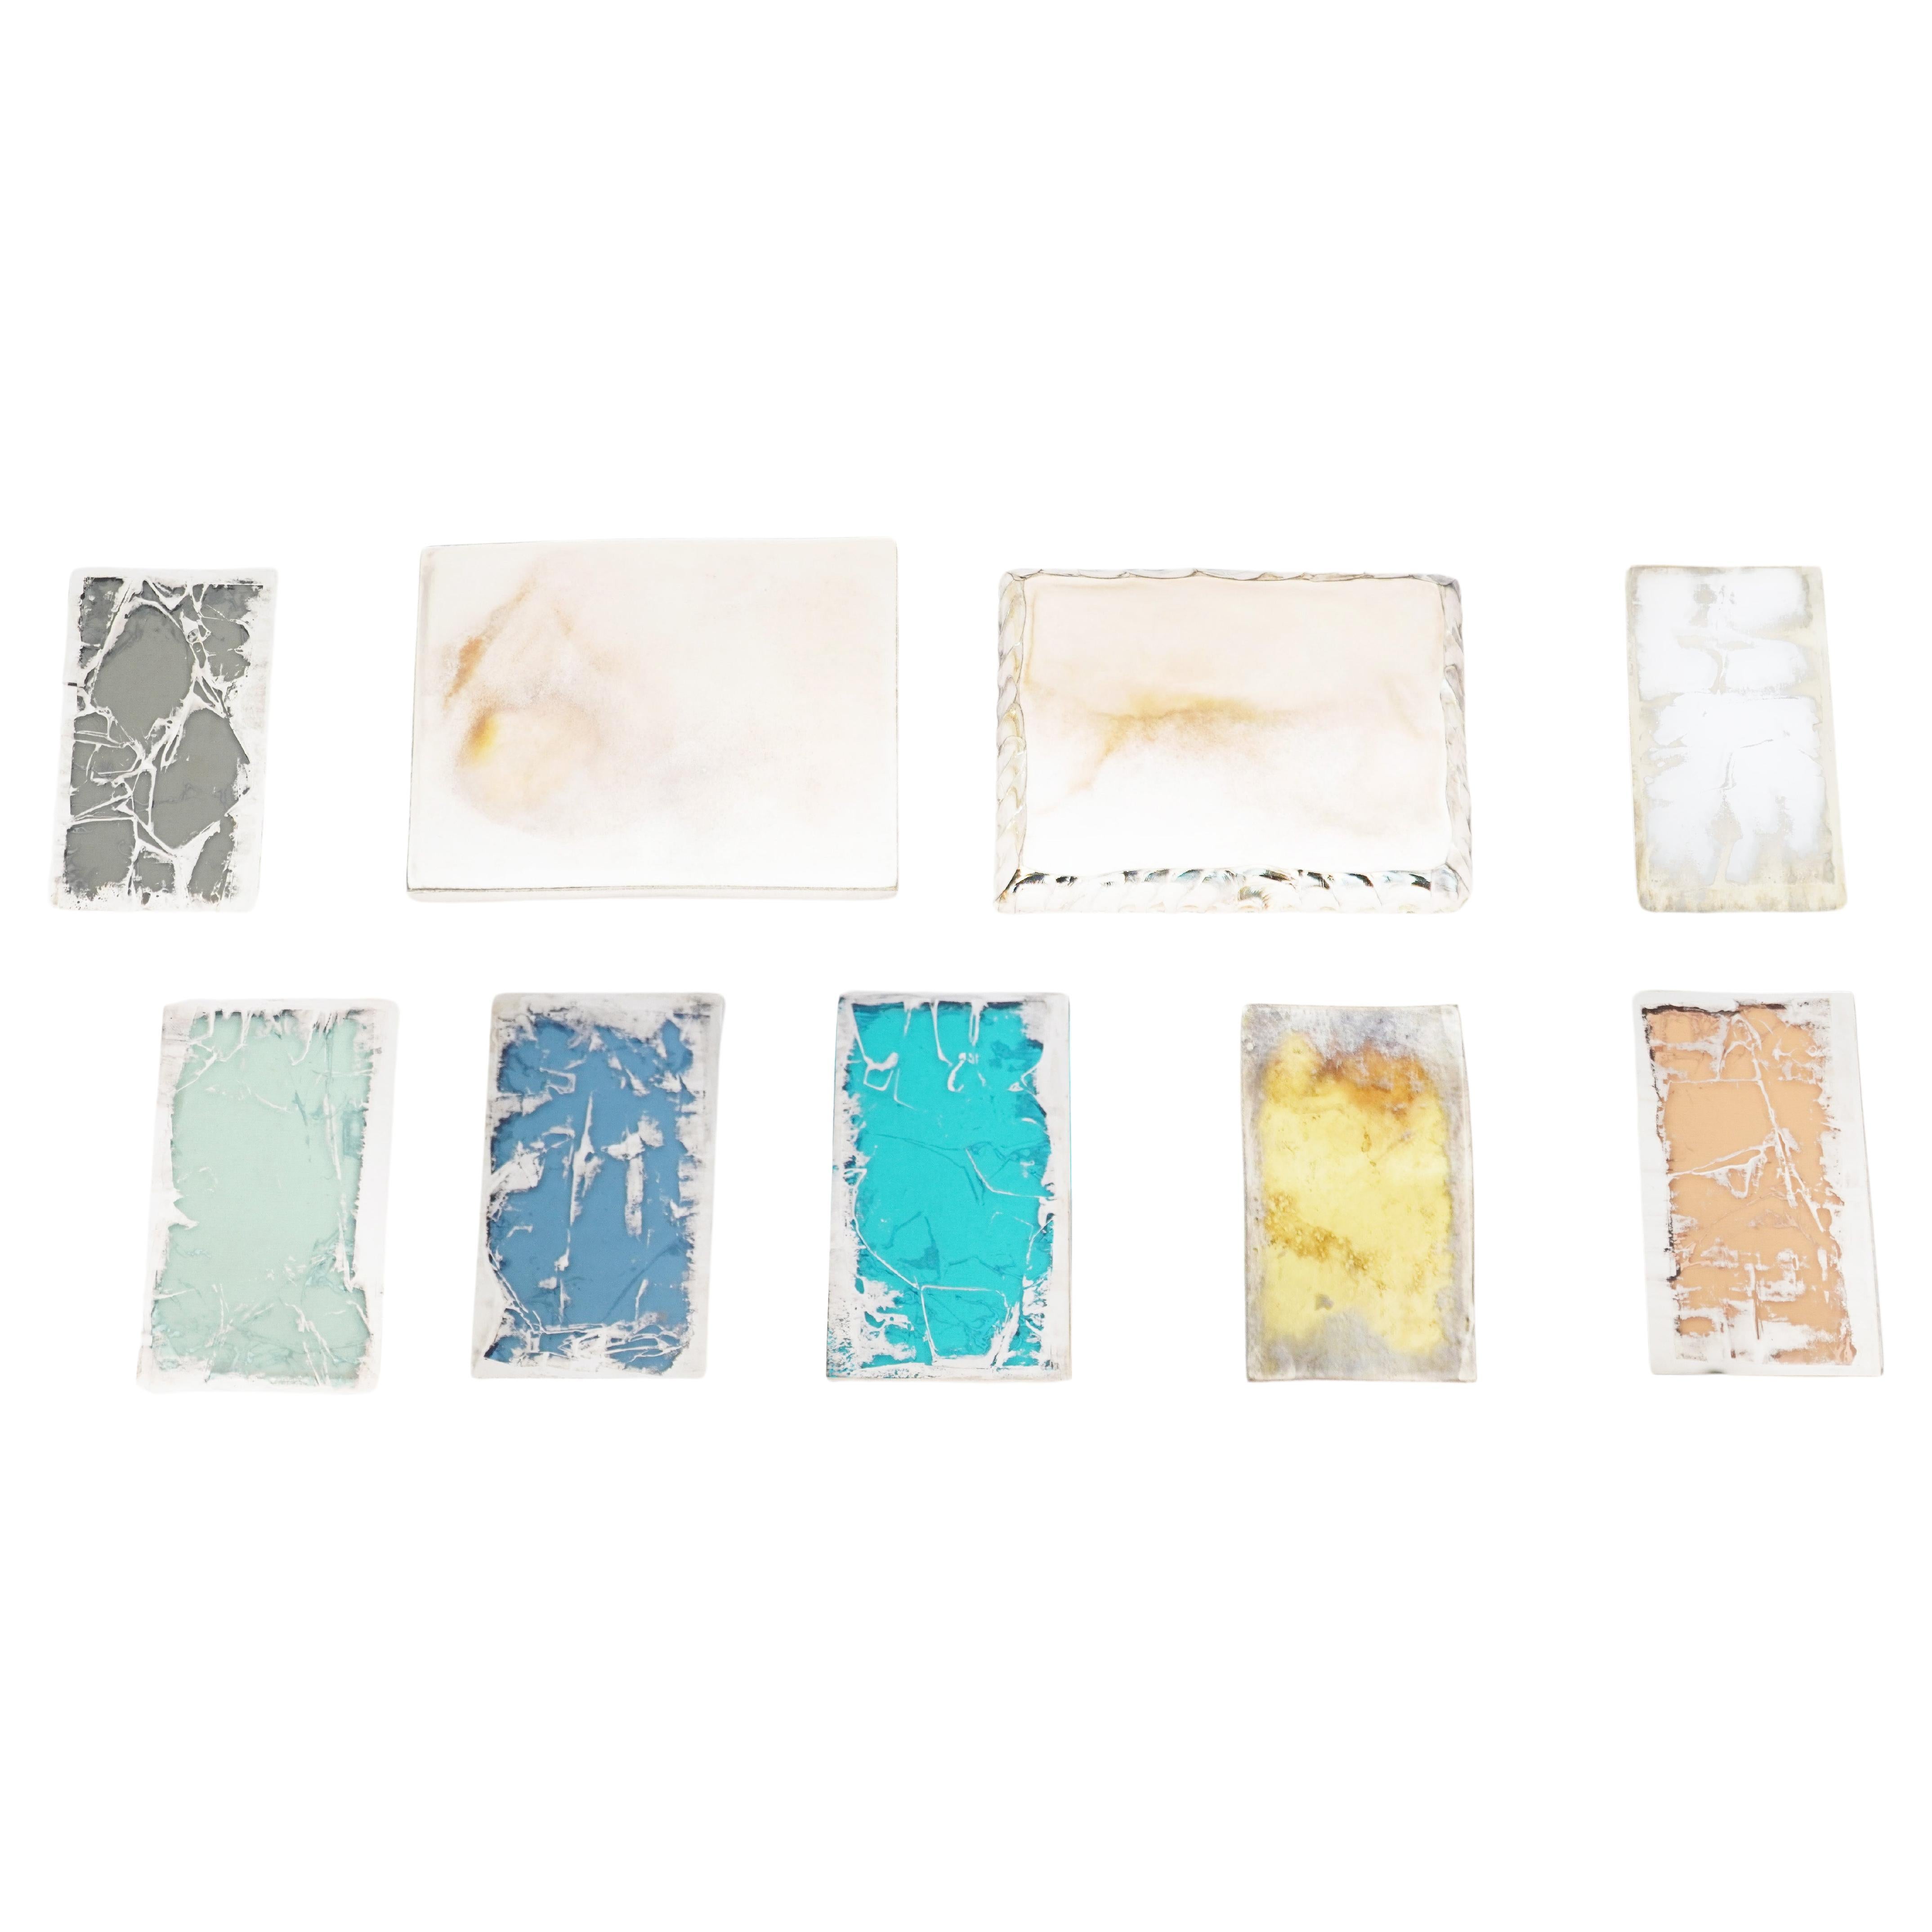 Sabrina Landini set of 3 Silvered Glass Samples, ask your favourite colors  